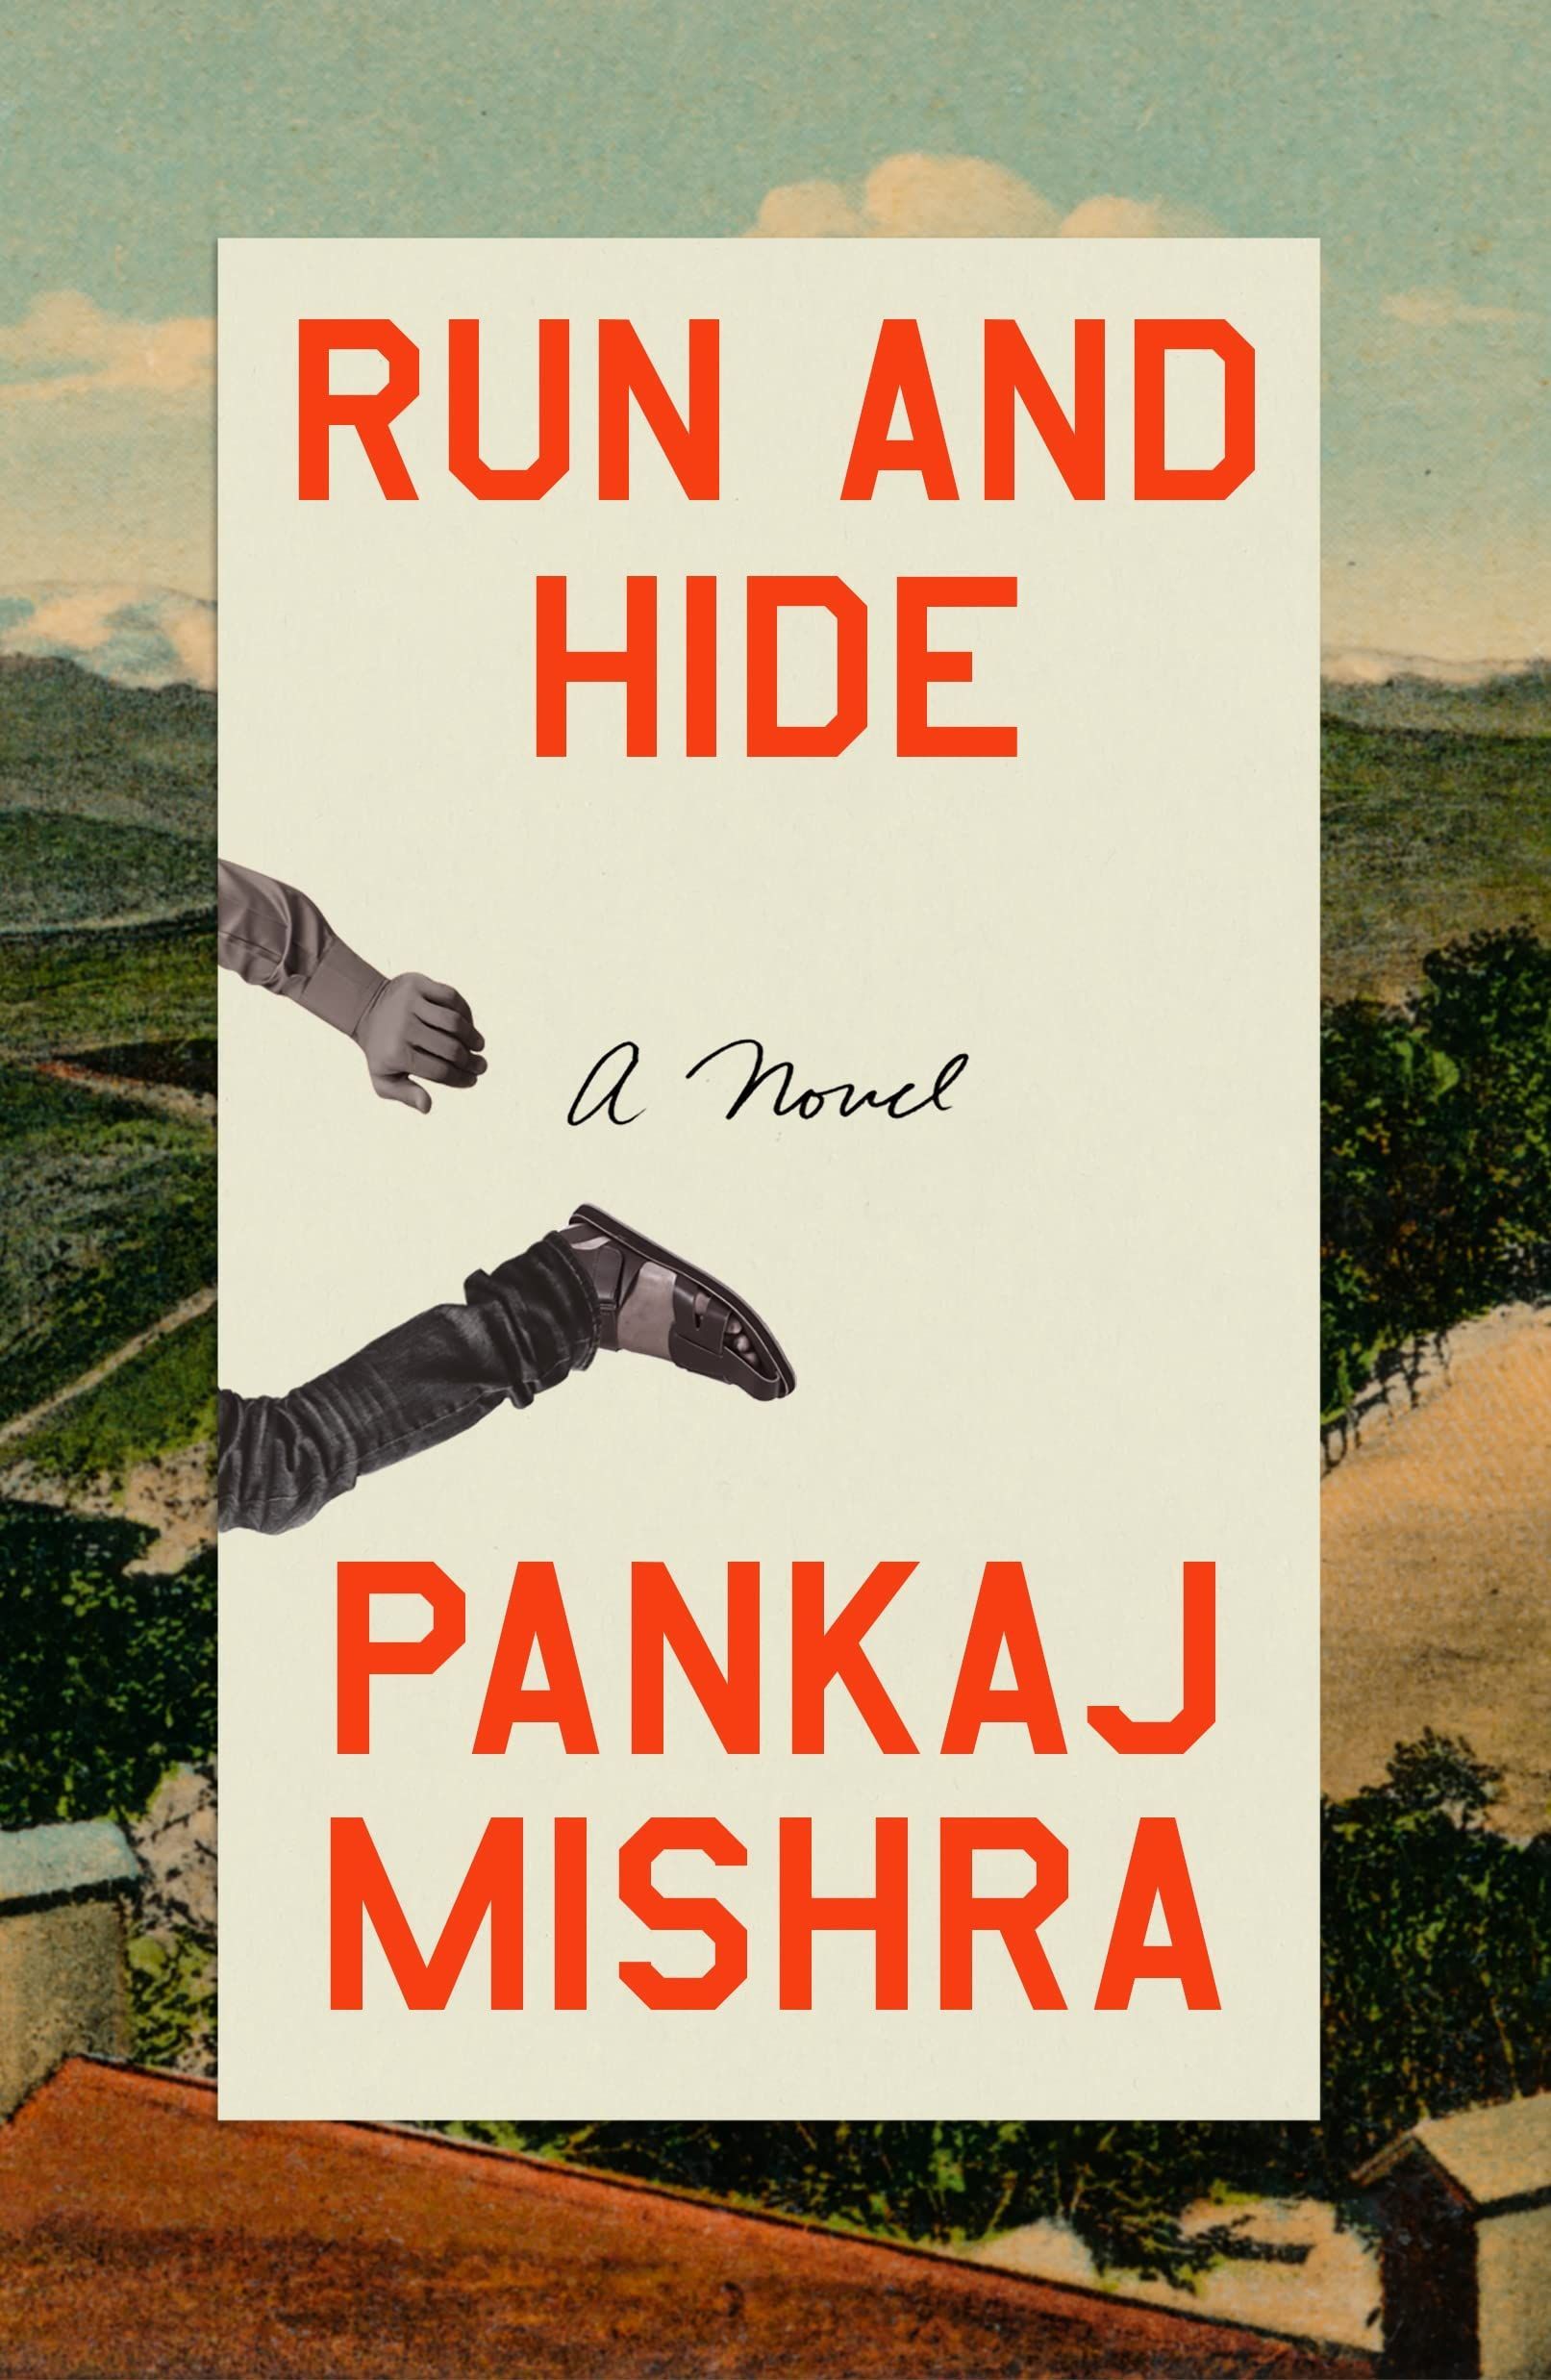 A Life Poorly and Jointly Lived: On Pankaj Mishra’s “Run and Hide”